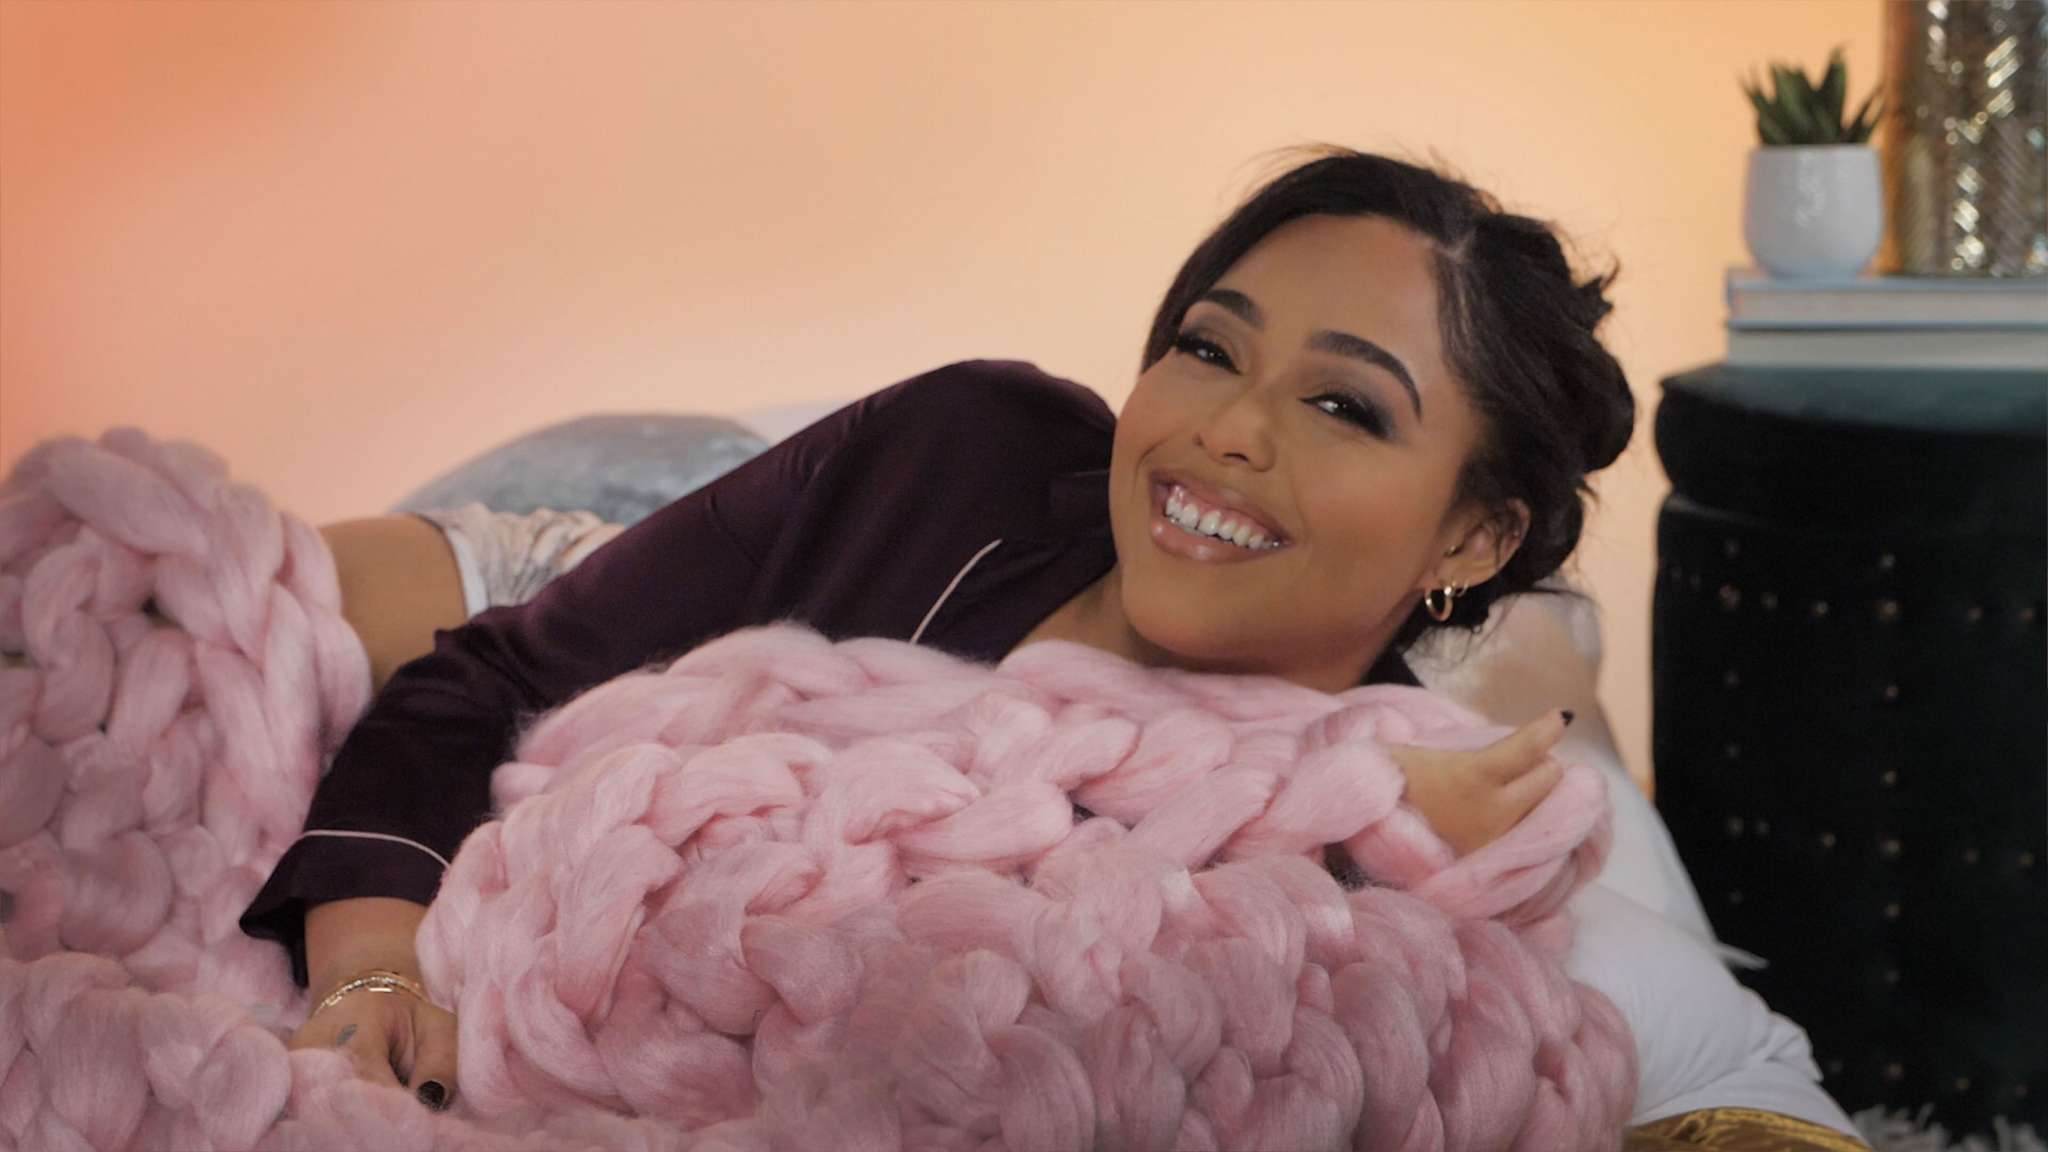 Jordyn Woods Parties And 'Secures The Bag' In London, While The Kardashians Are Reliving The Cheating Drama - Watch The Videos